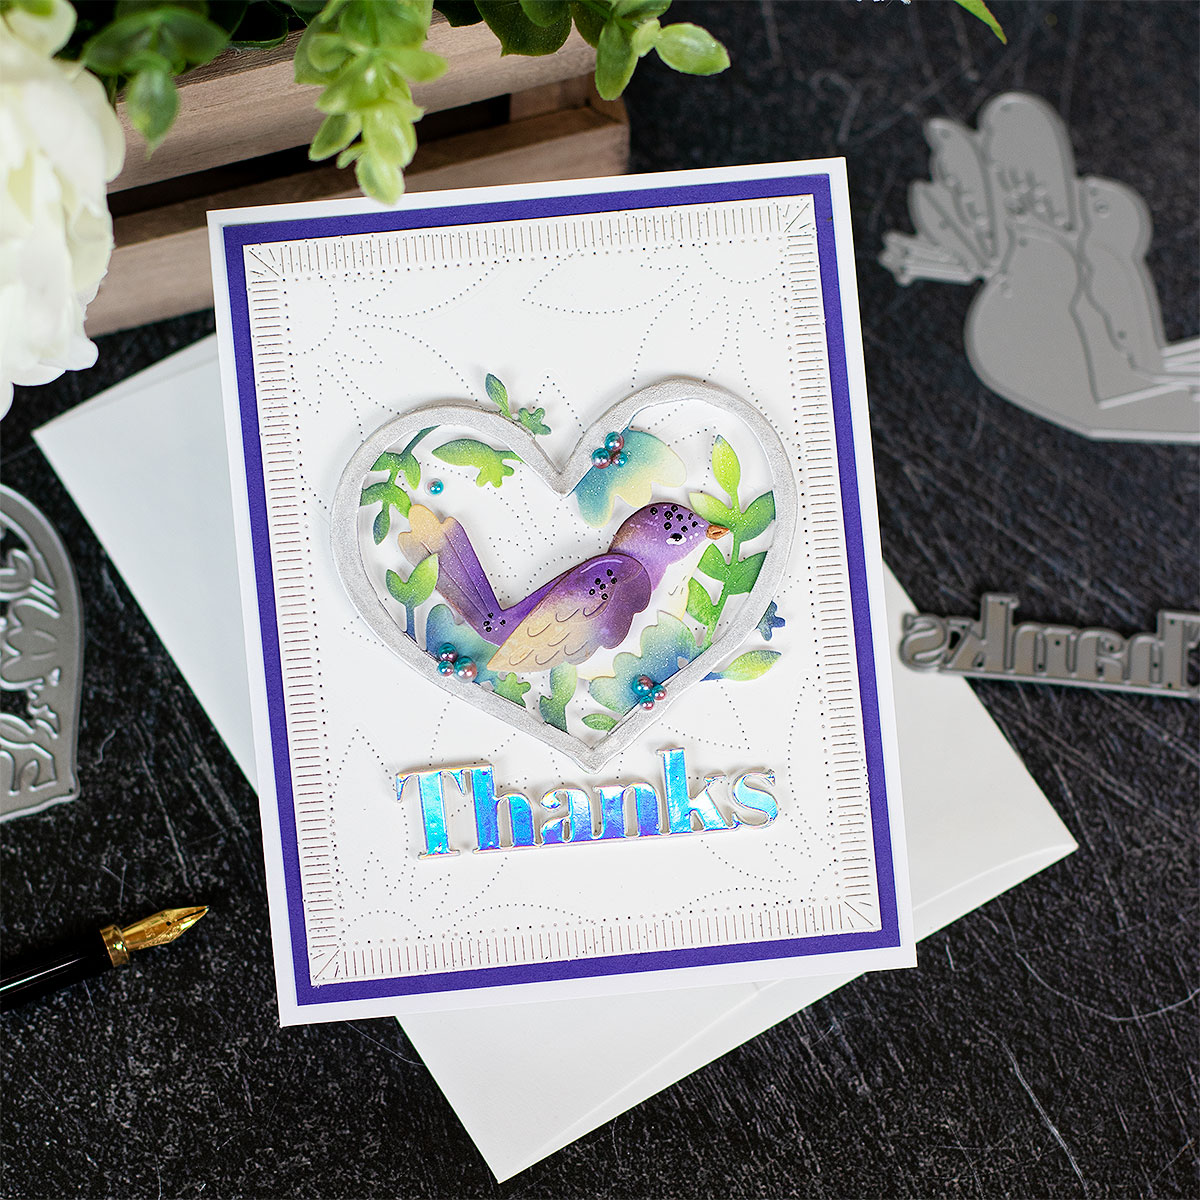 Card making with only die cuts